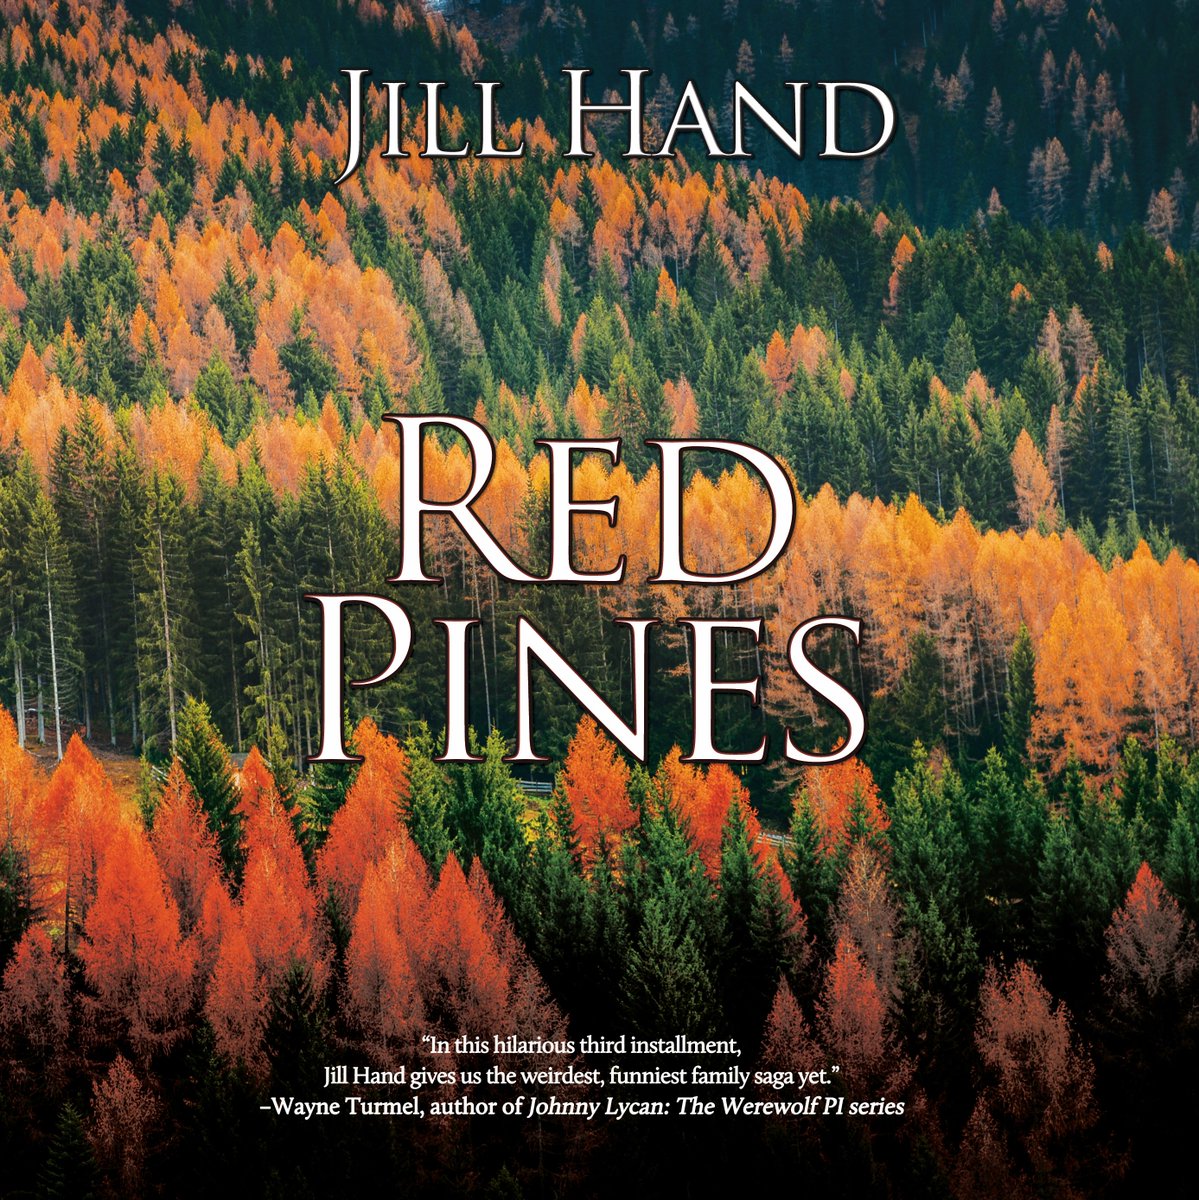 Southern suspense thriller 'Red Pines' by Jill Hand is available now! As the Trapnell siblings return to White Oaks, they're ensnared in a web of mystery, danger, and dark secrets. Can they survive what's hunting them? #RedPines #SouthernThriller geni.us/RedPines